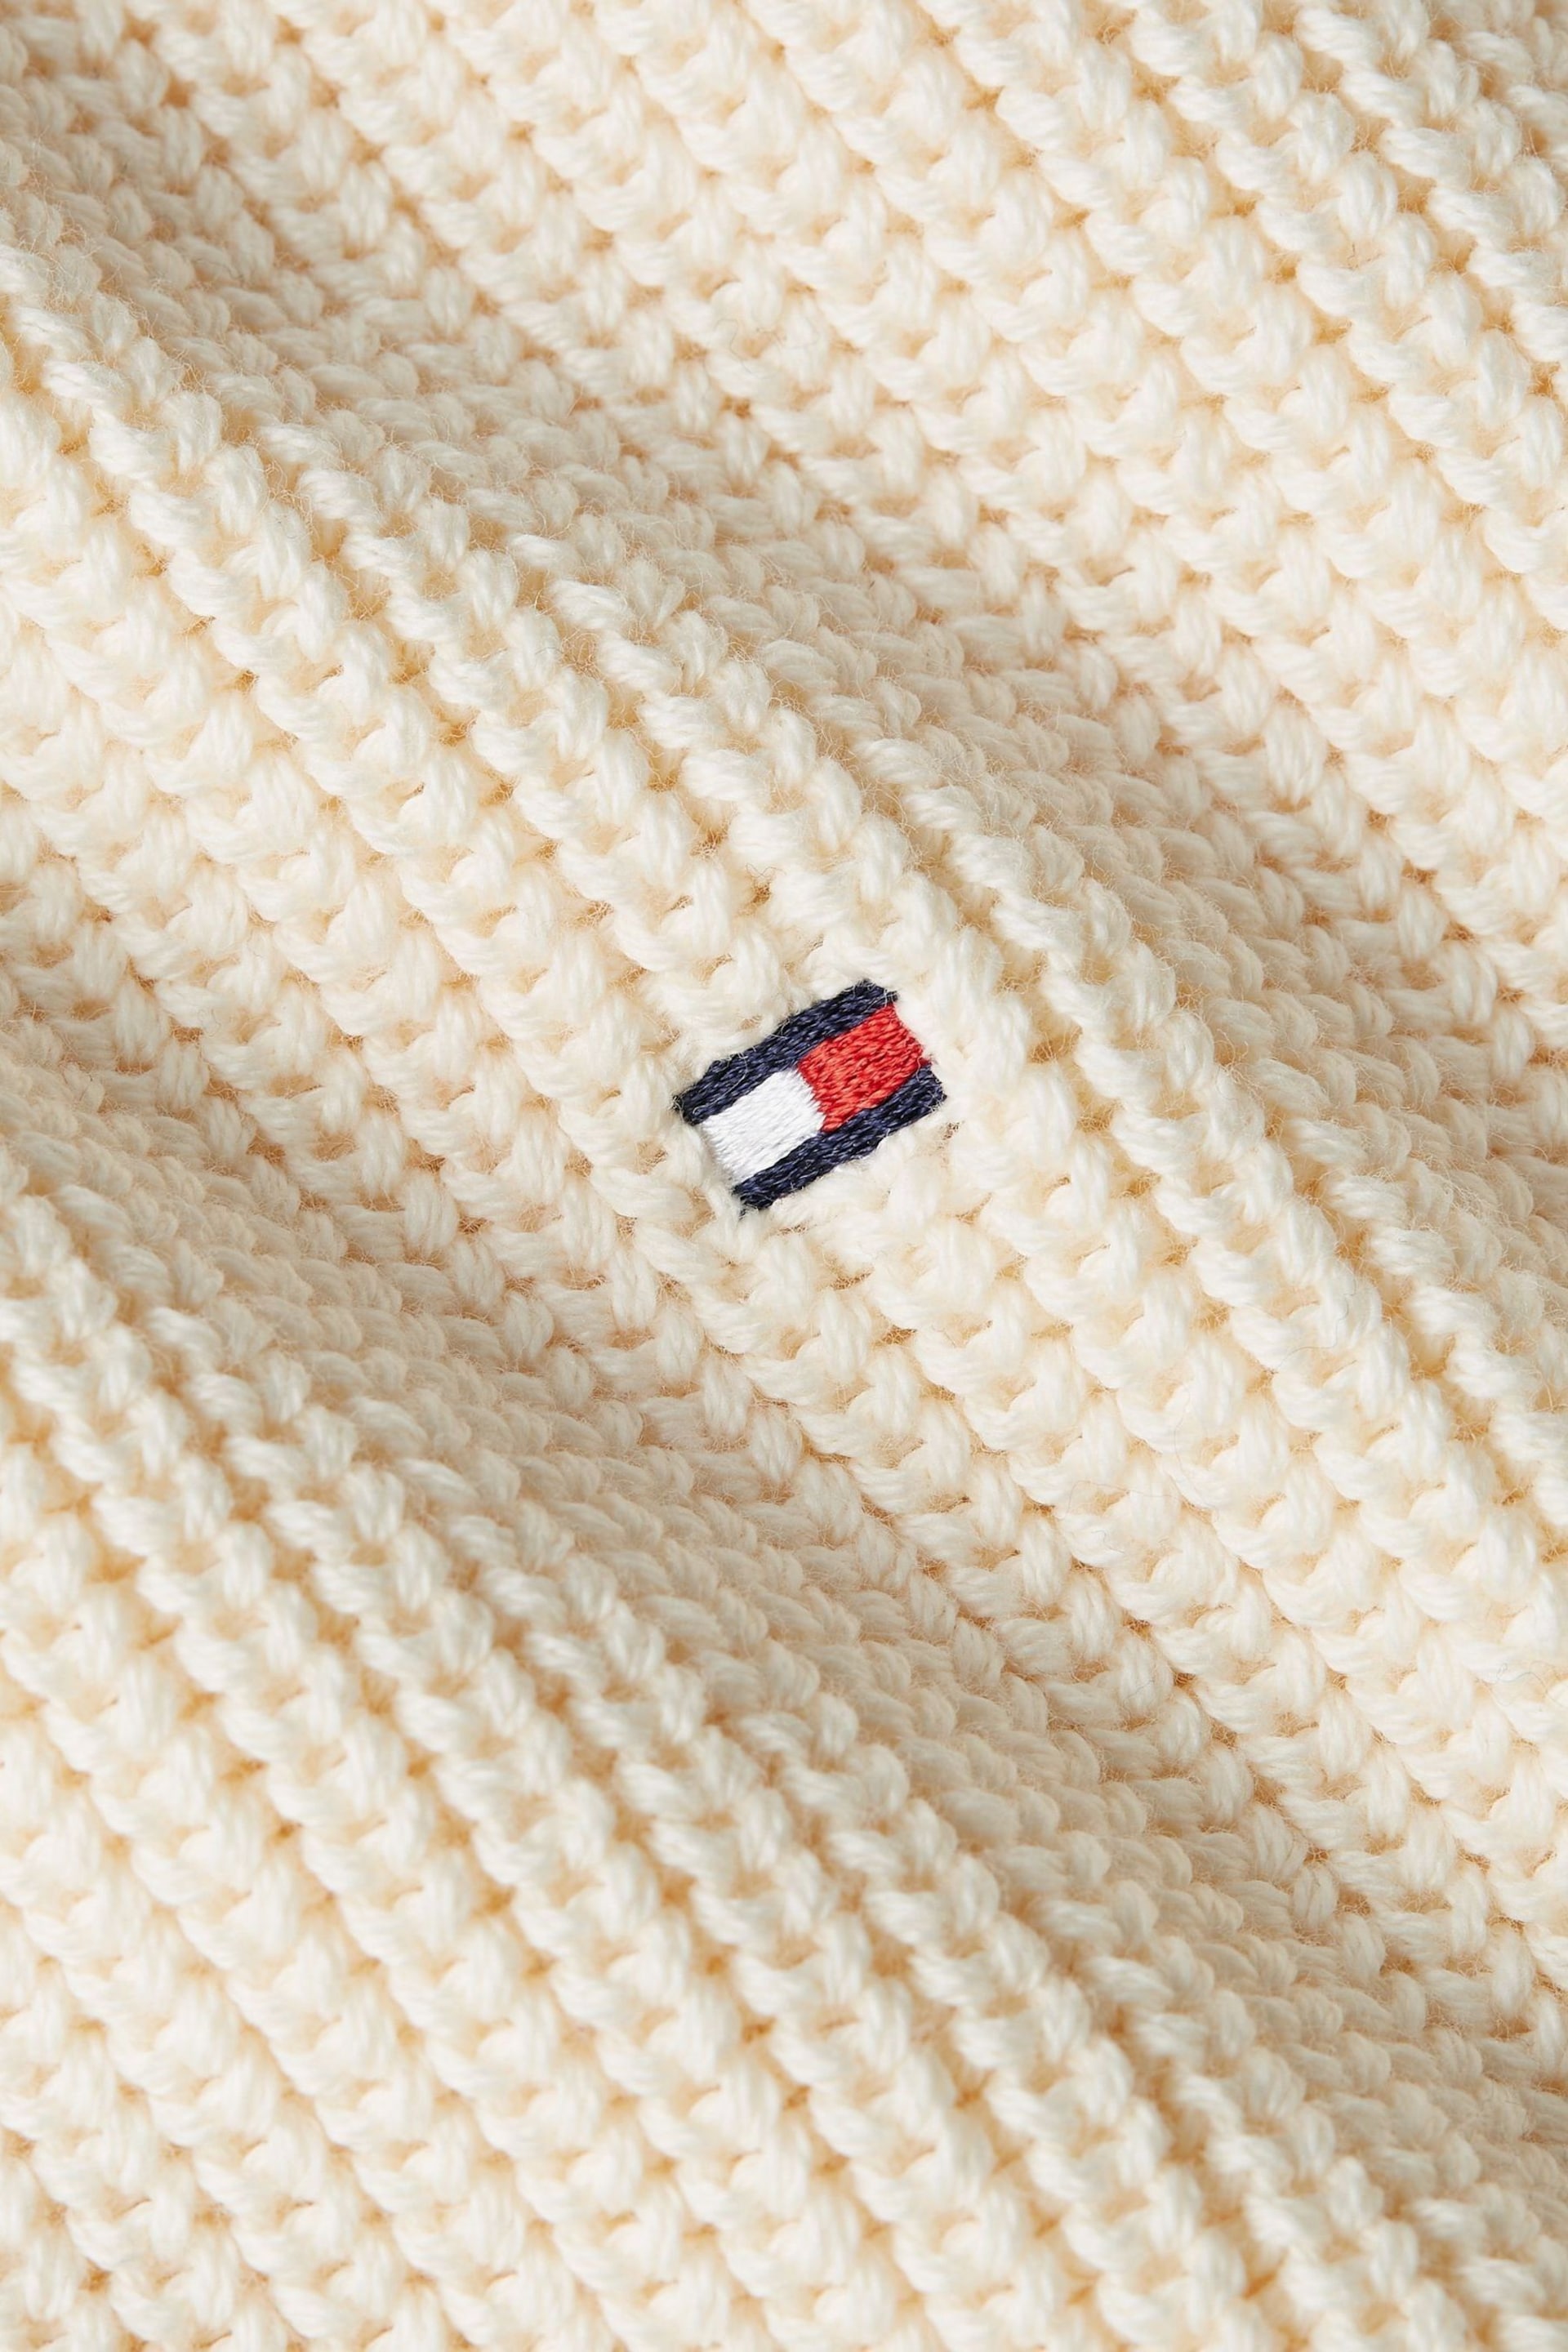 Tommy Hilfiger Cream Knit Sweater - Image 7 of 7